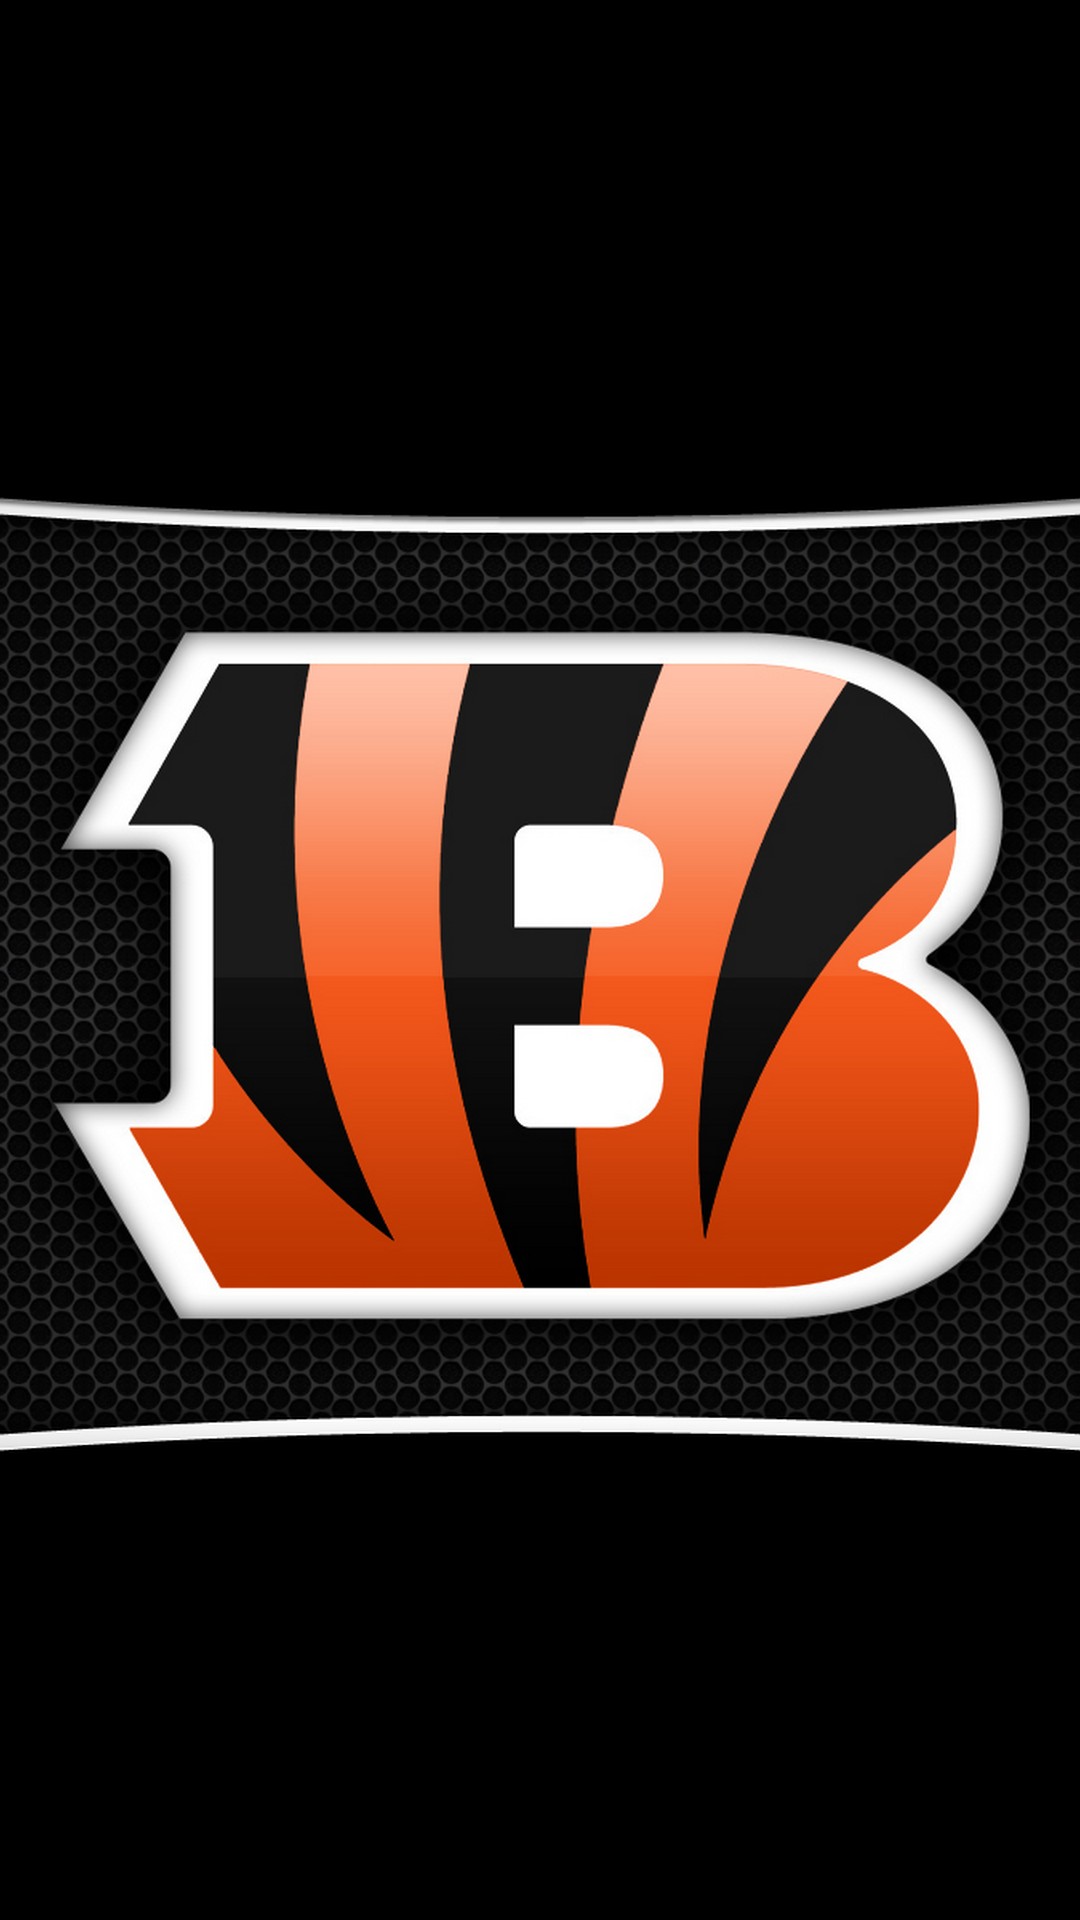 Cincinnati Bengals iPhone Screen Wallpaper With high-resolution 1080X1920 pixel. Donwload and set as wallpaper for your iPhone X, iPhone XS home screen backgrounds, XS Max, XR, iPhone8 lock screen wallpaper, iPhone 7, 6, SE, and other mobile devices